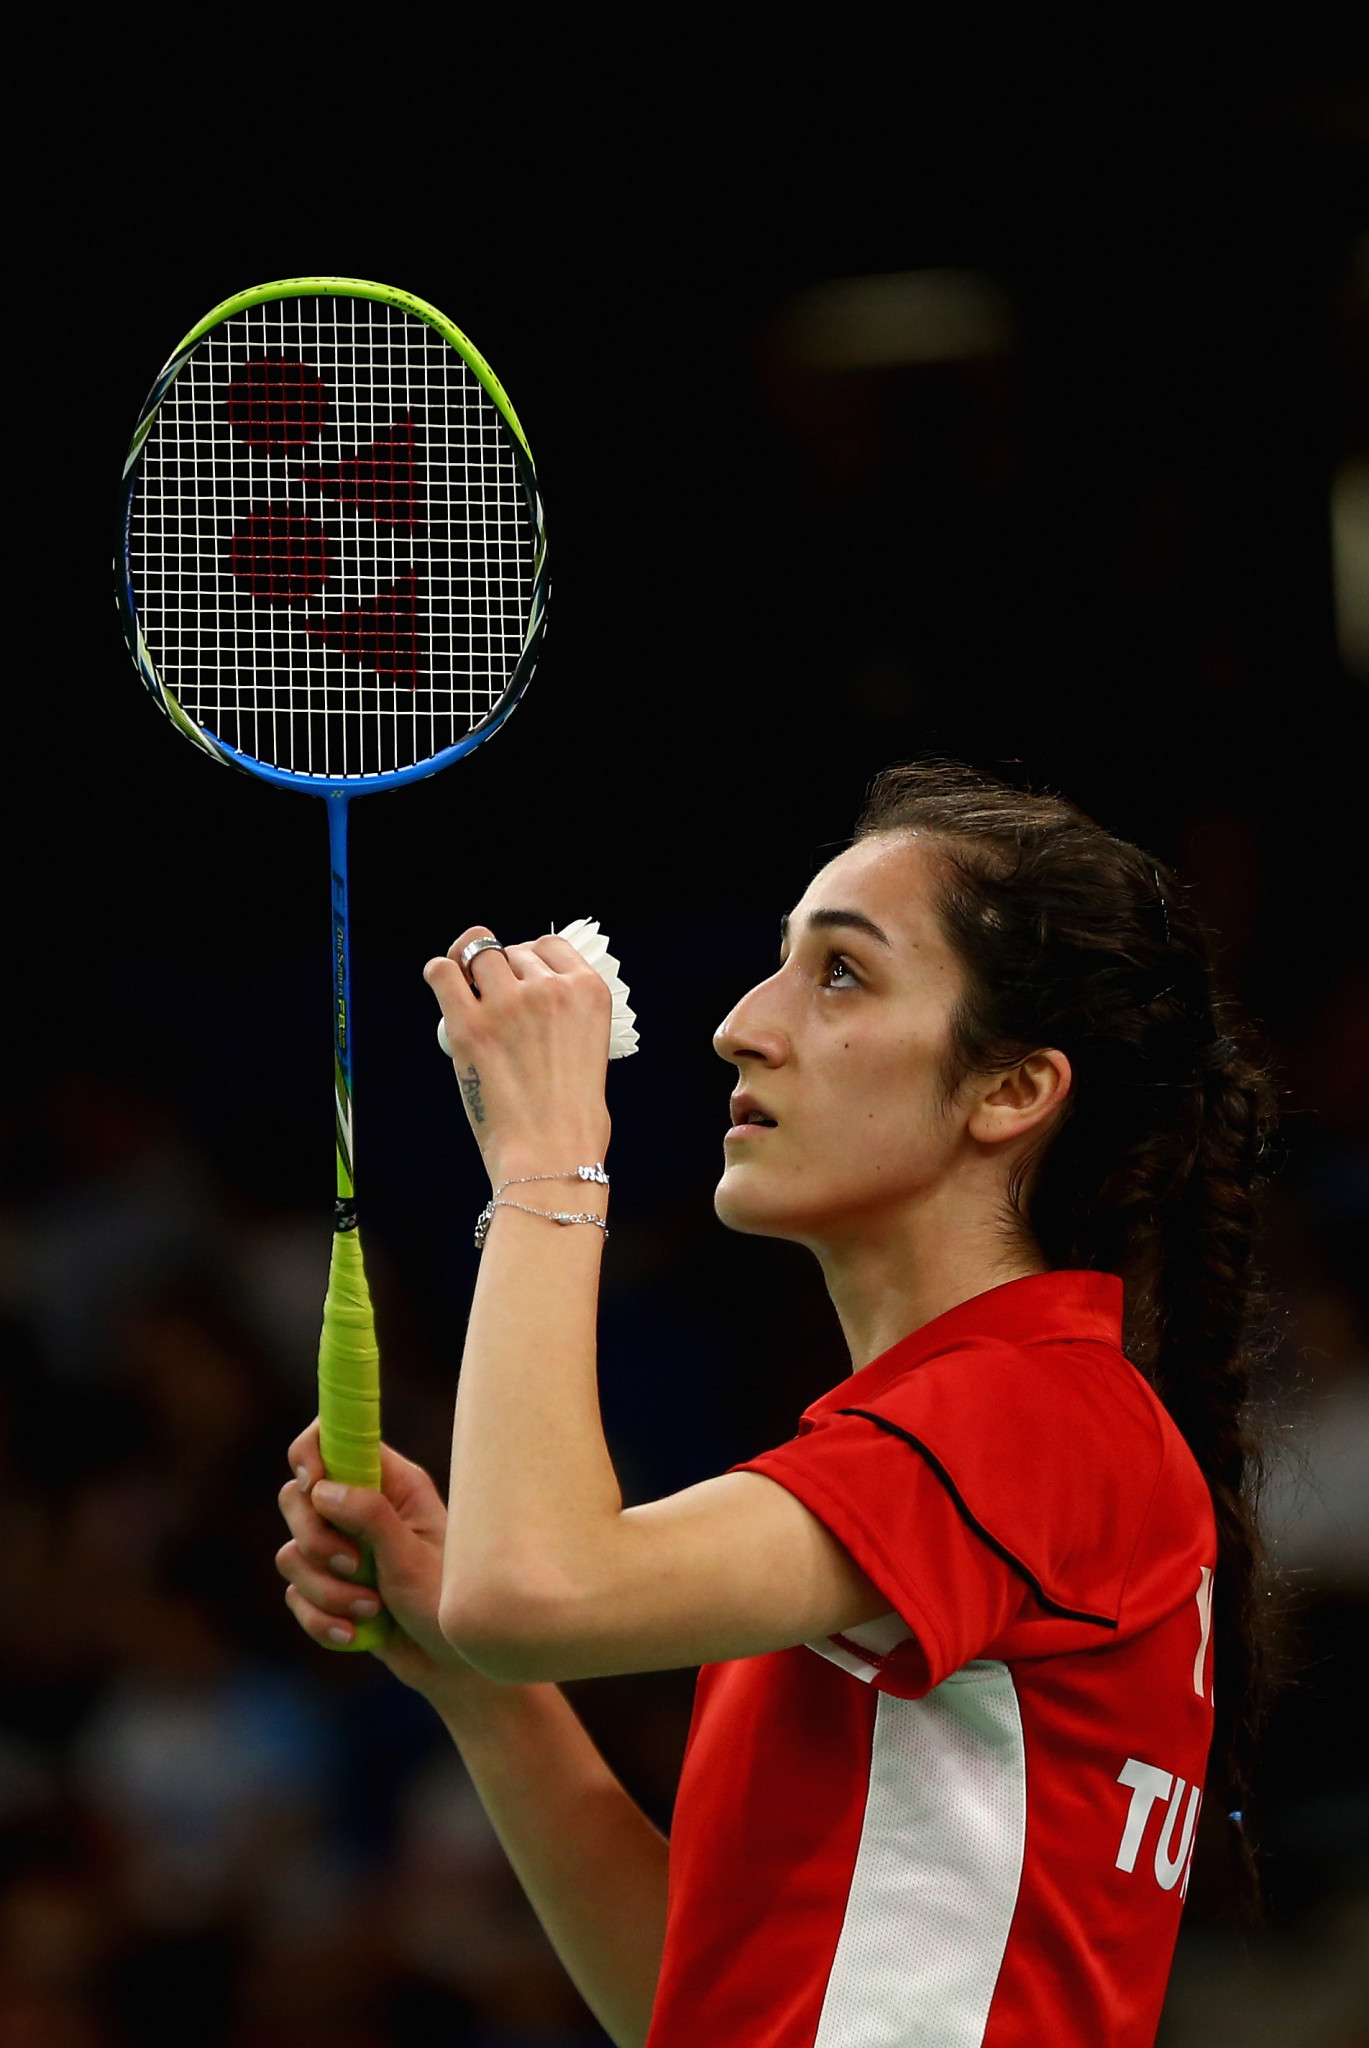 Yiğit told to self-isolate as COVID-19 continues to hit All England Open Badminton Championships